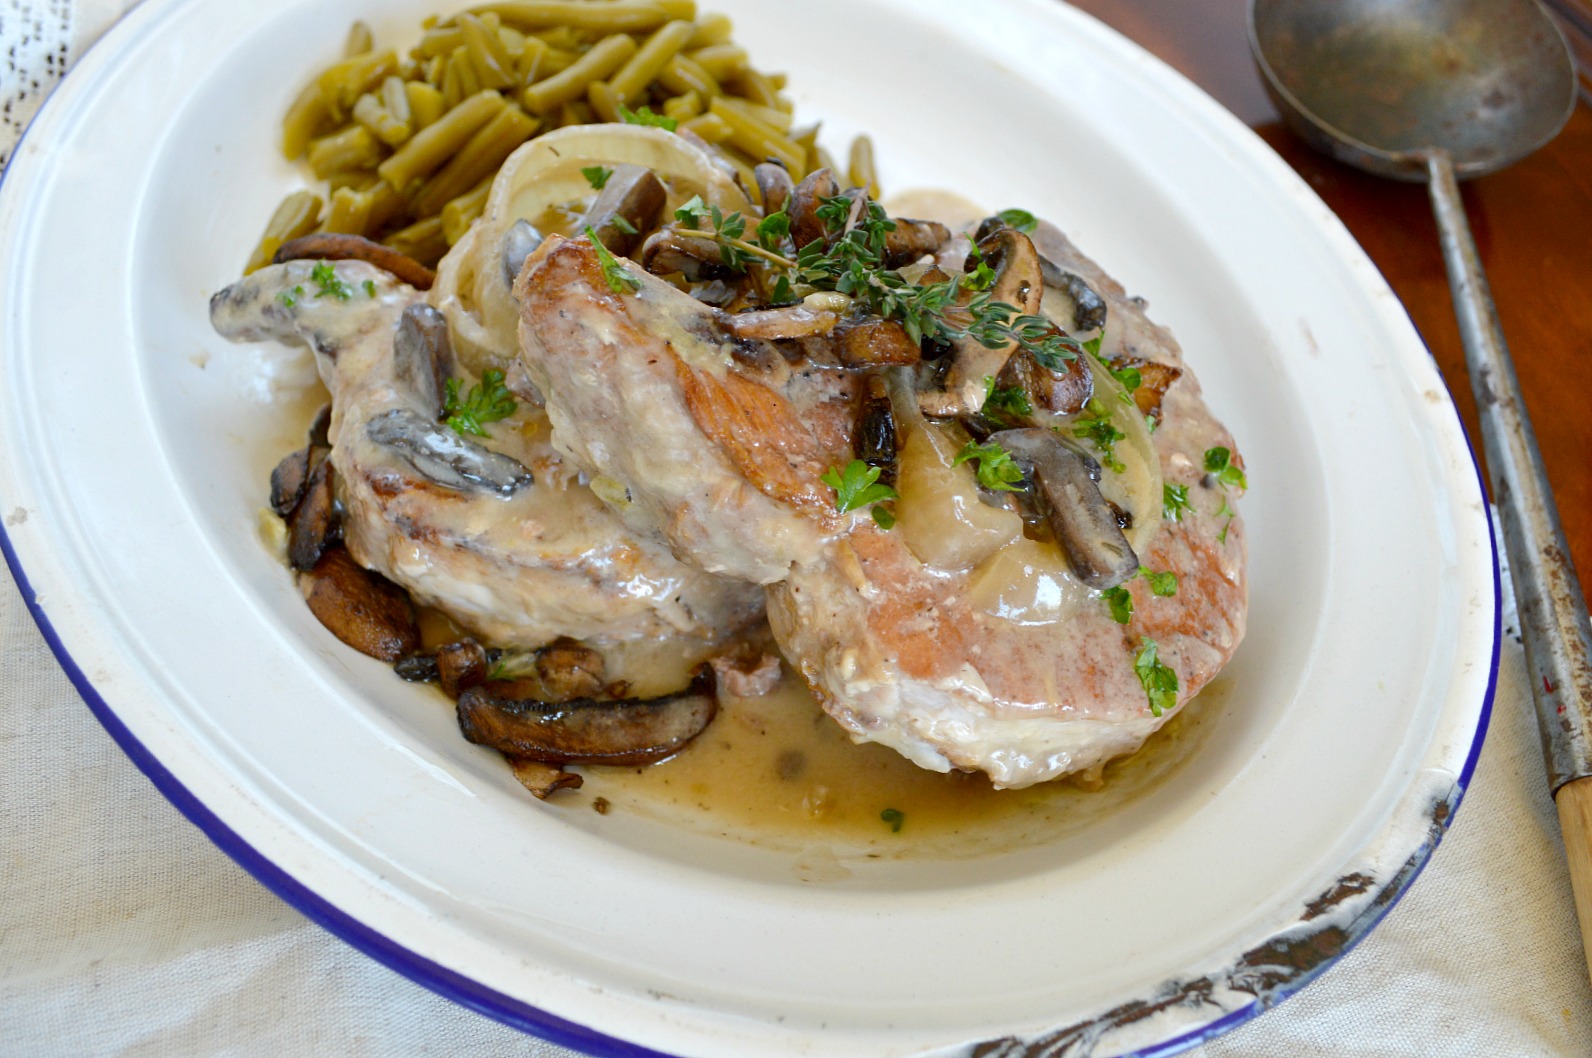 Crock Pot Pork Chops smothered with gravy, topped with mushroom, with green beans on the side